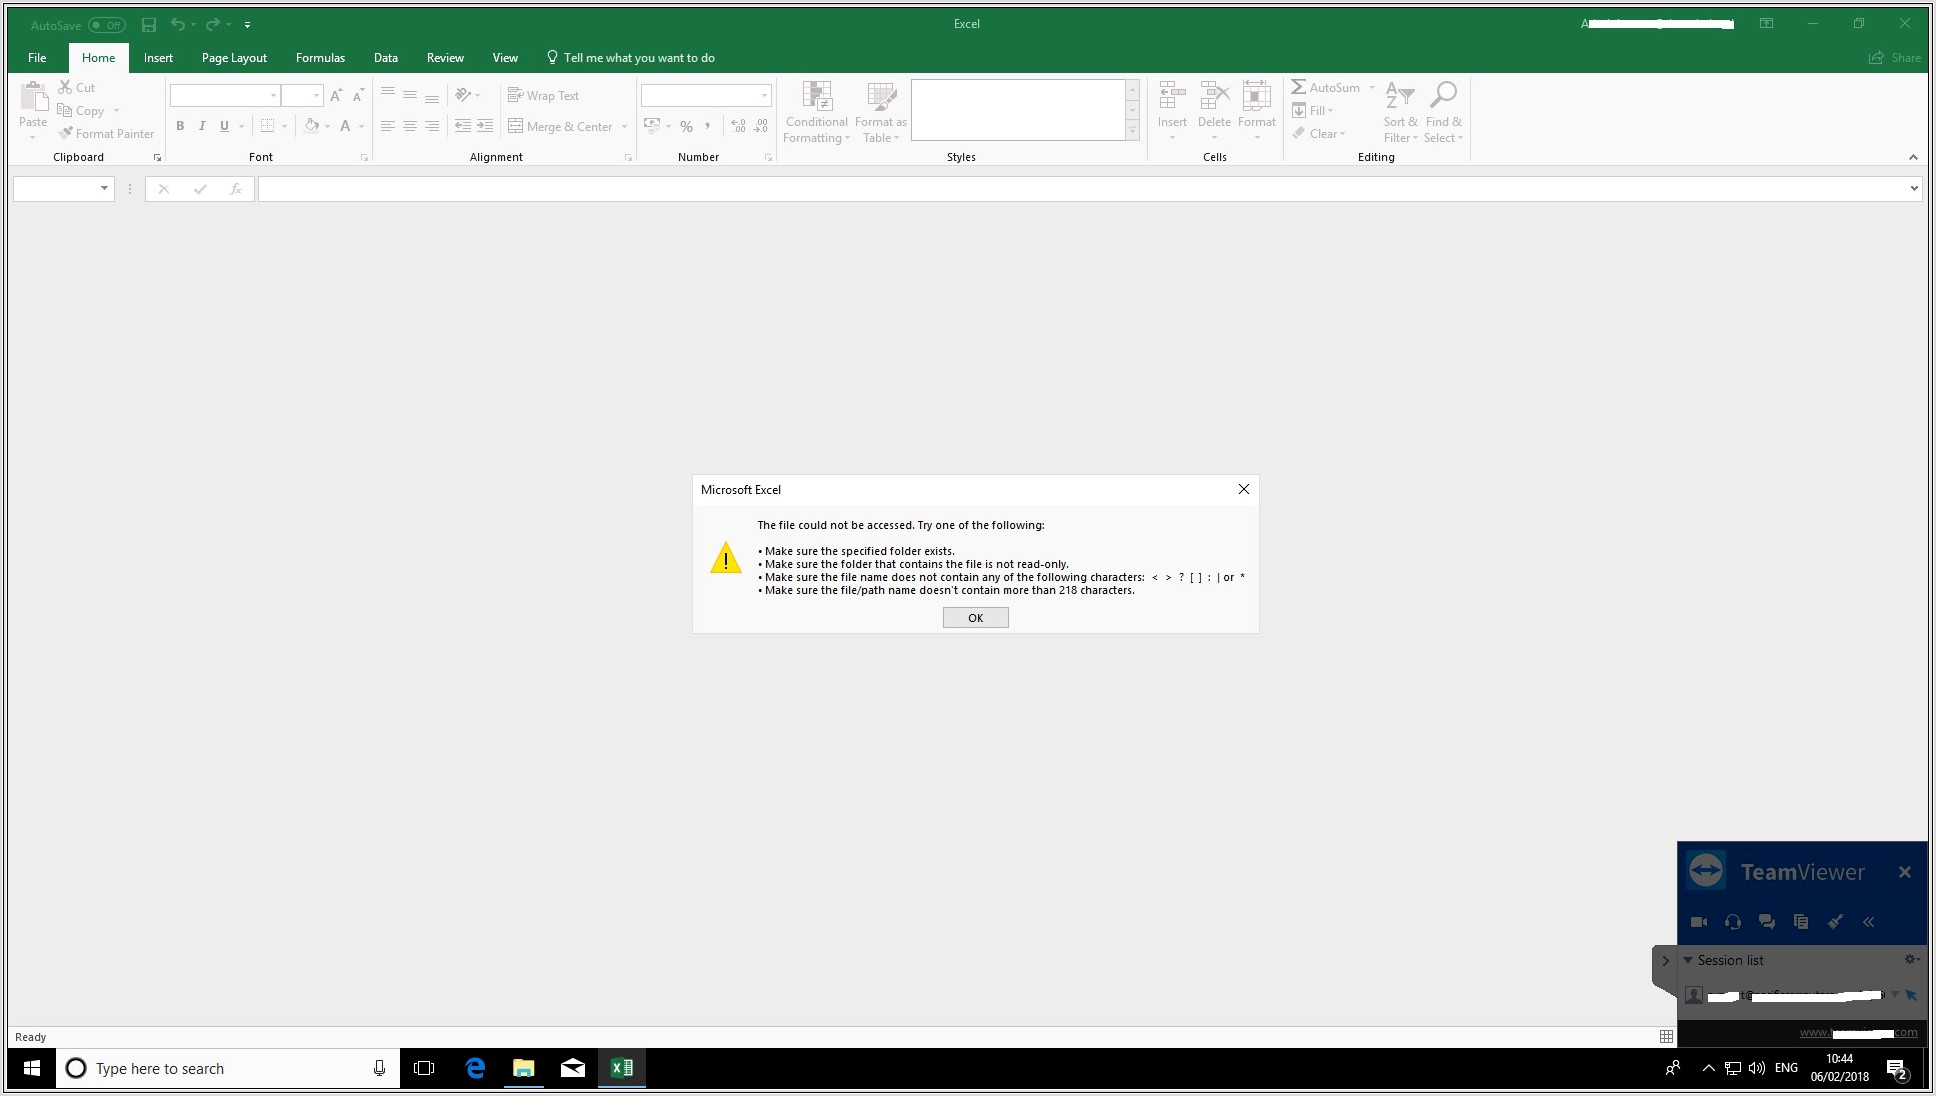 Microsoft Excel File Could Not Be Accessed